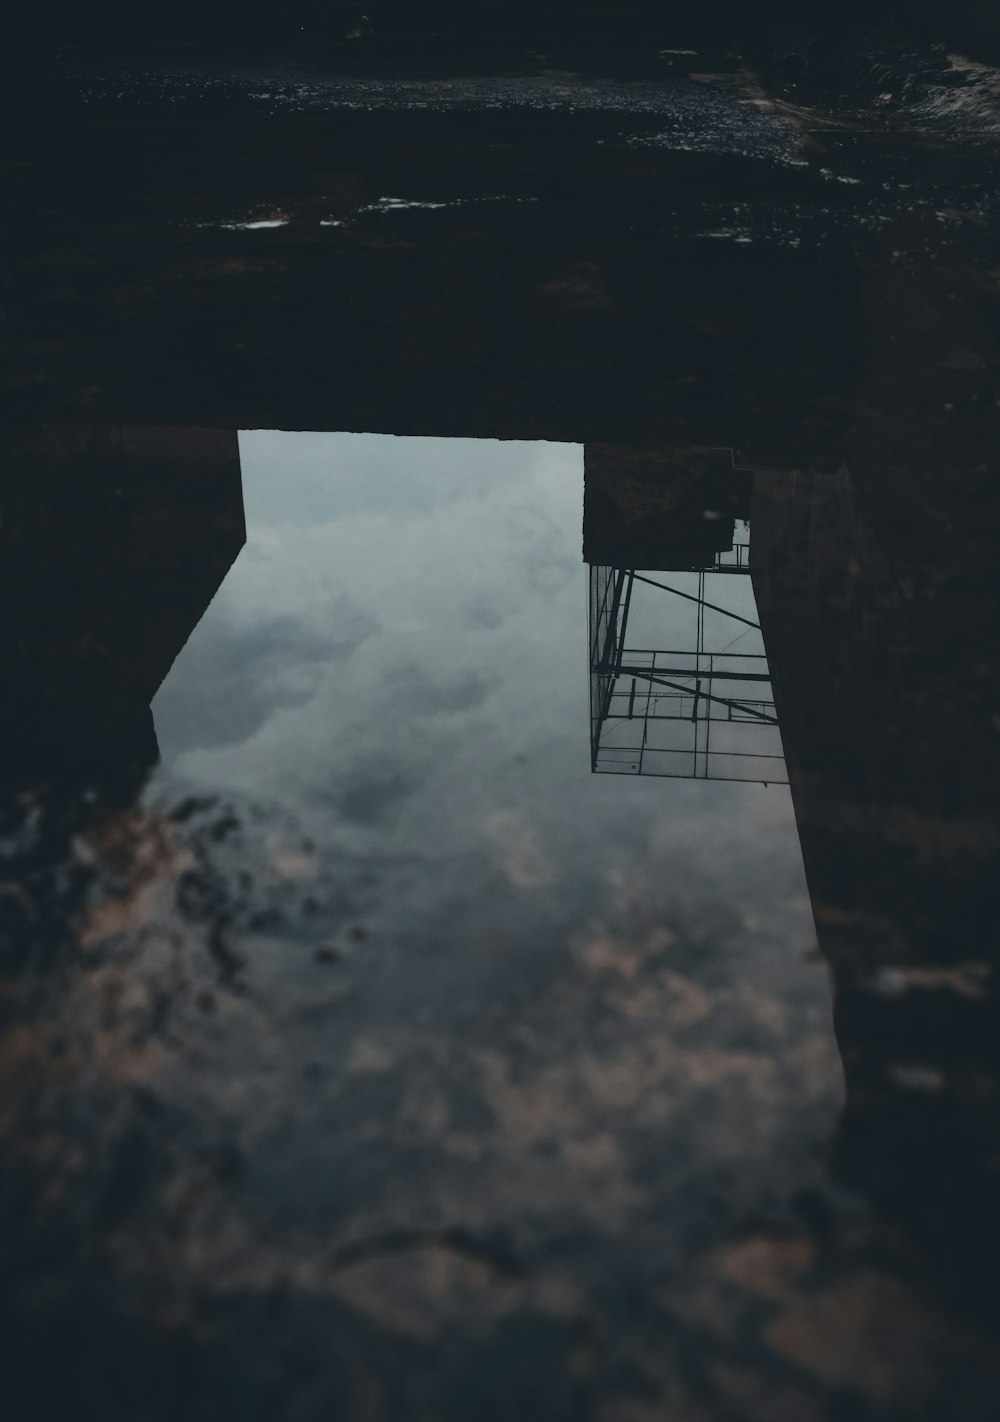 a reflection of a tower in a puddle of water